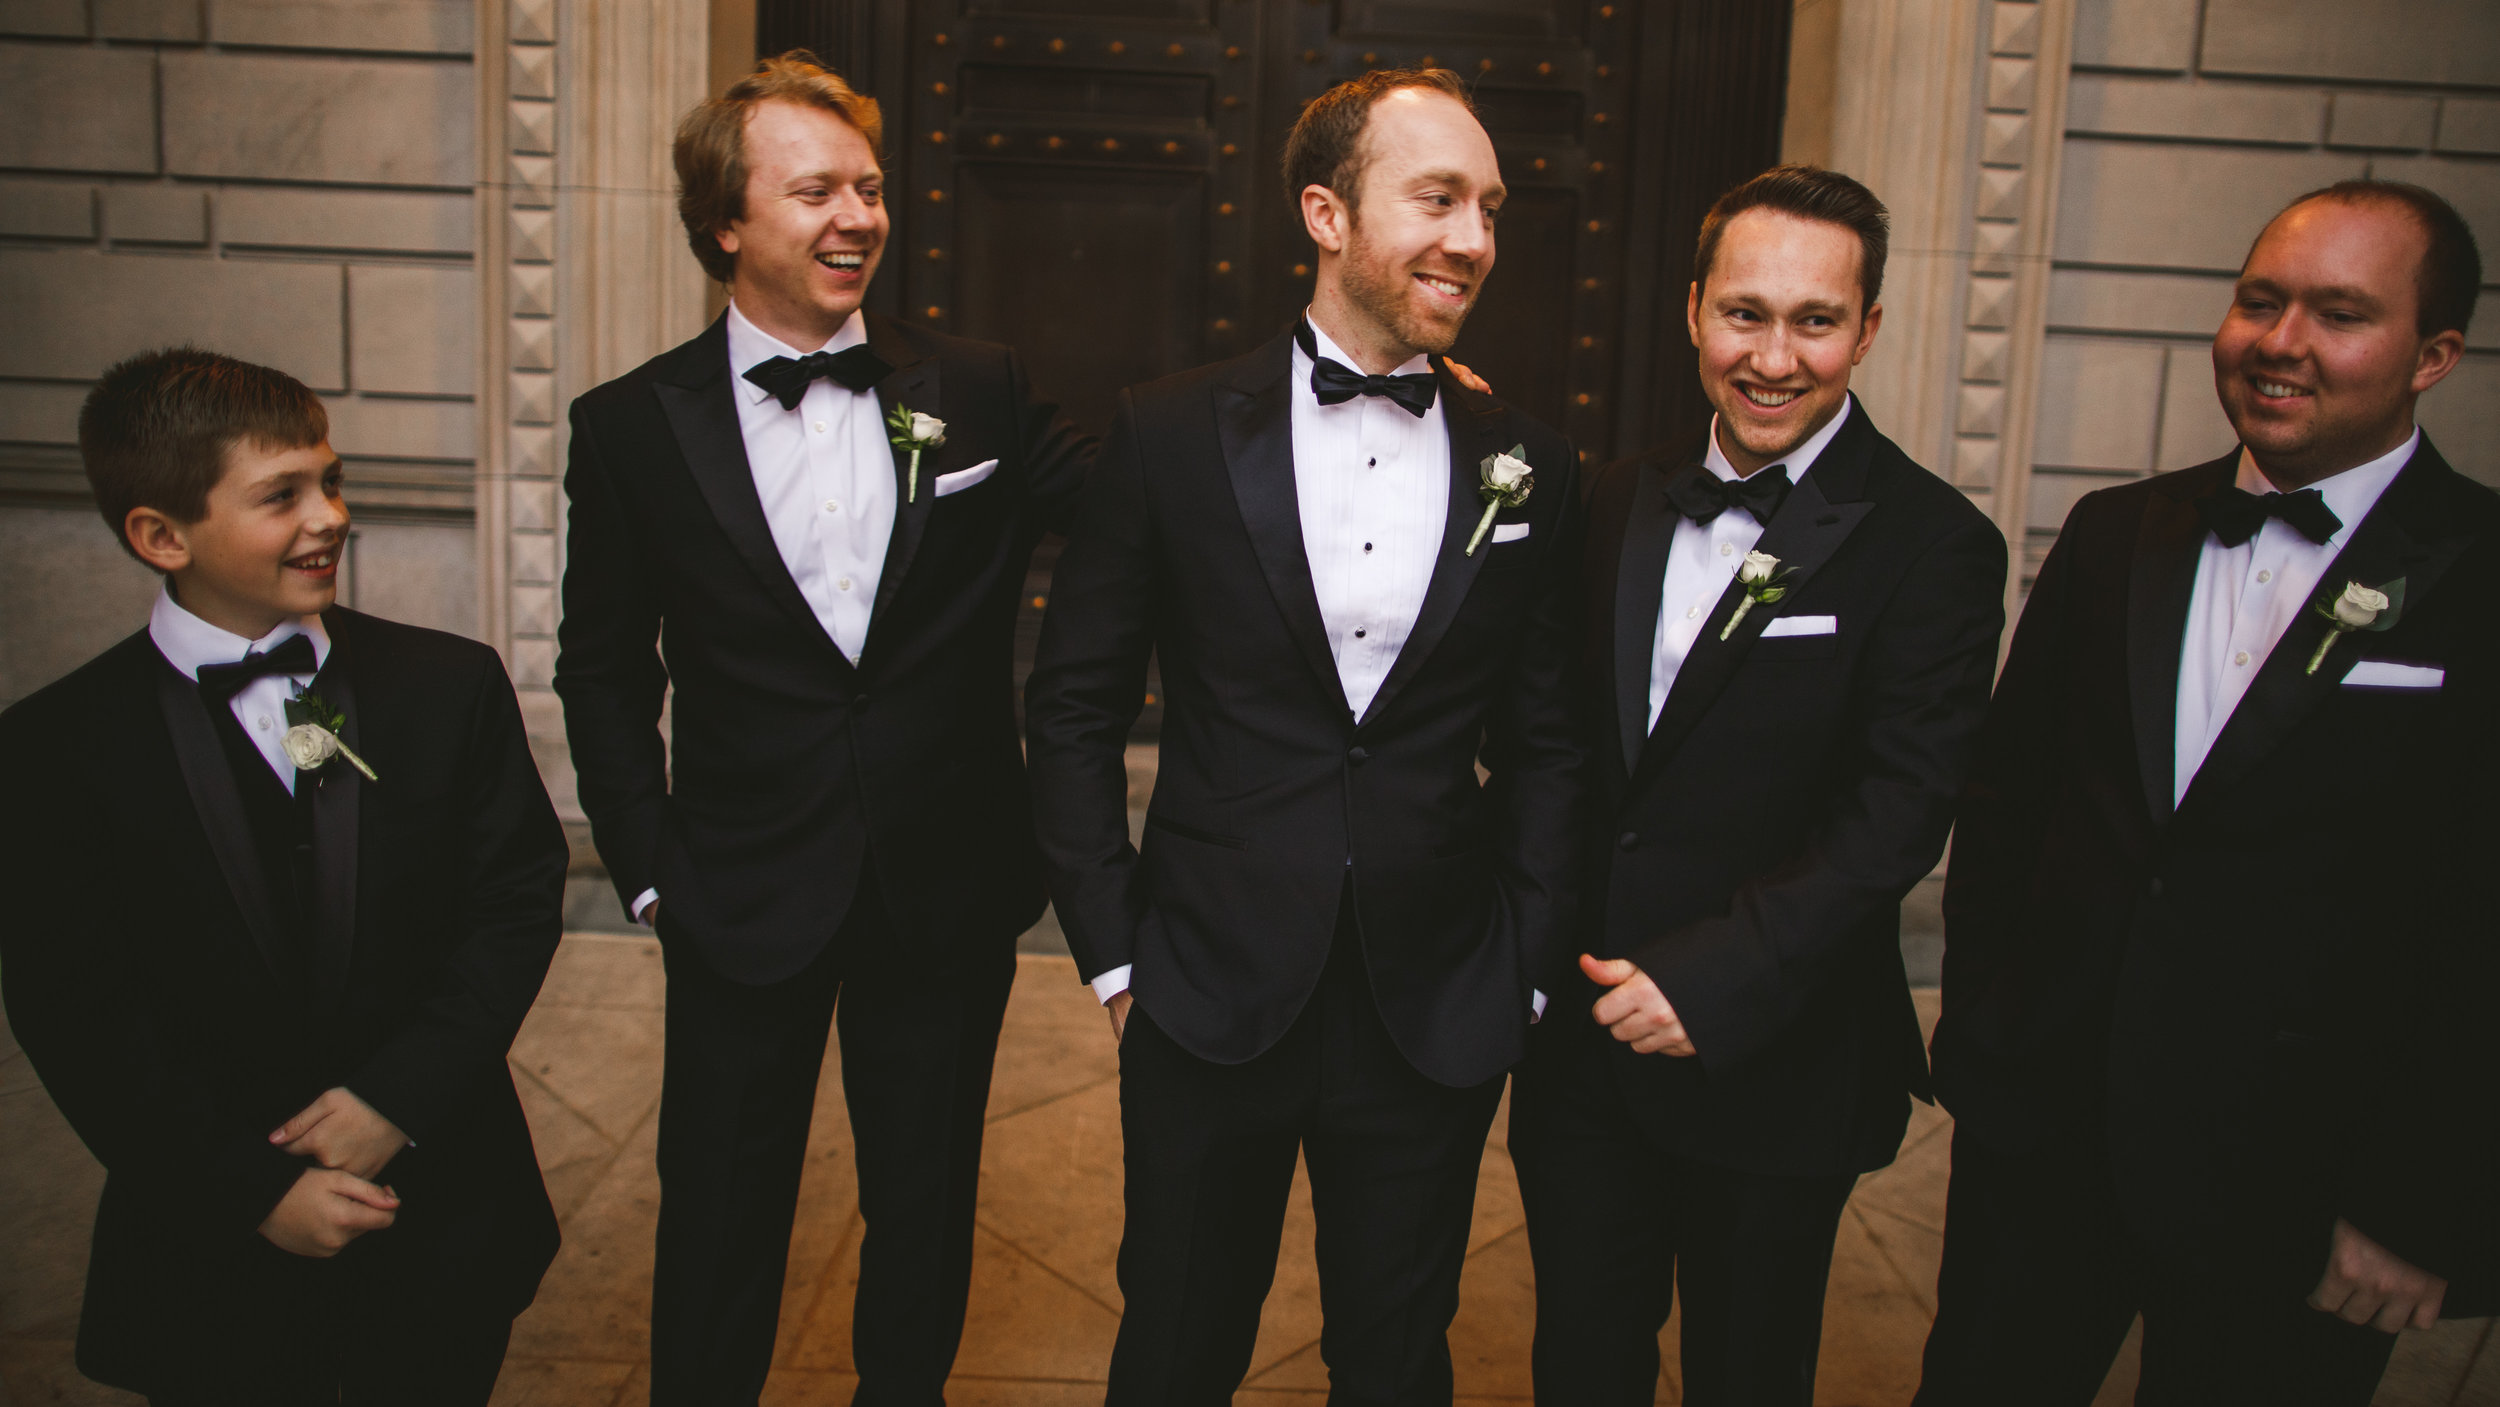 Carnegie Institution for Science DC wedding